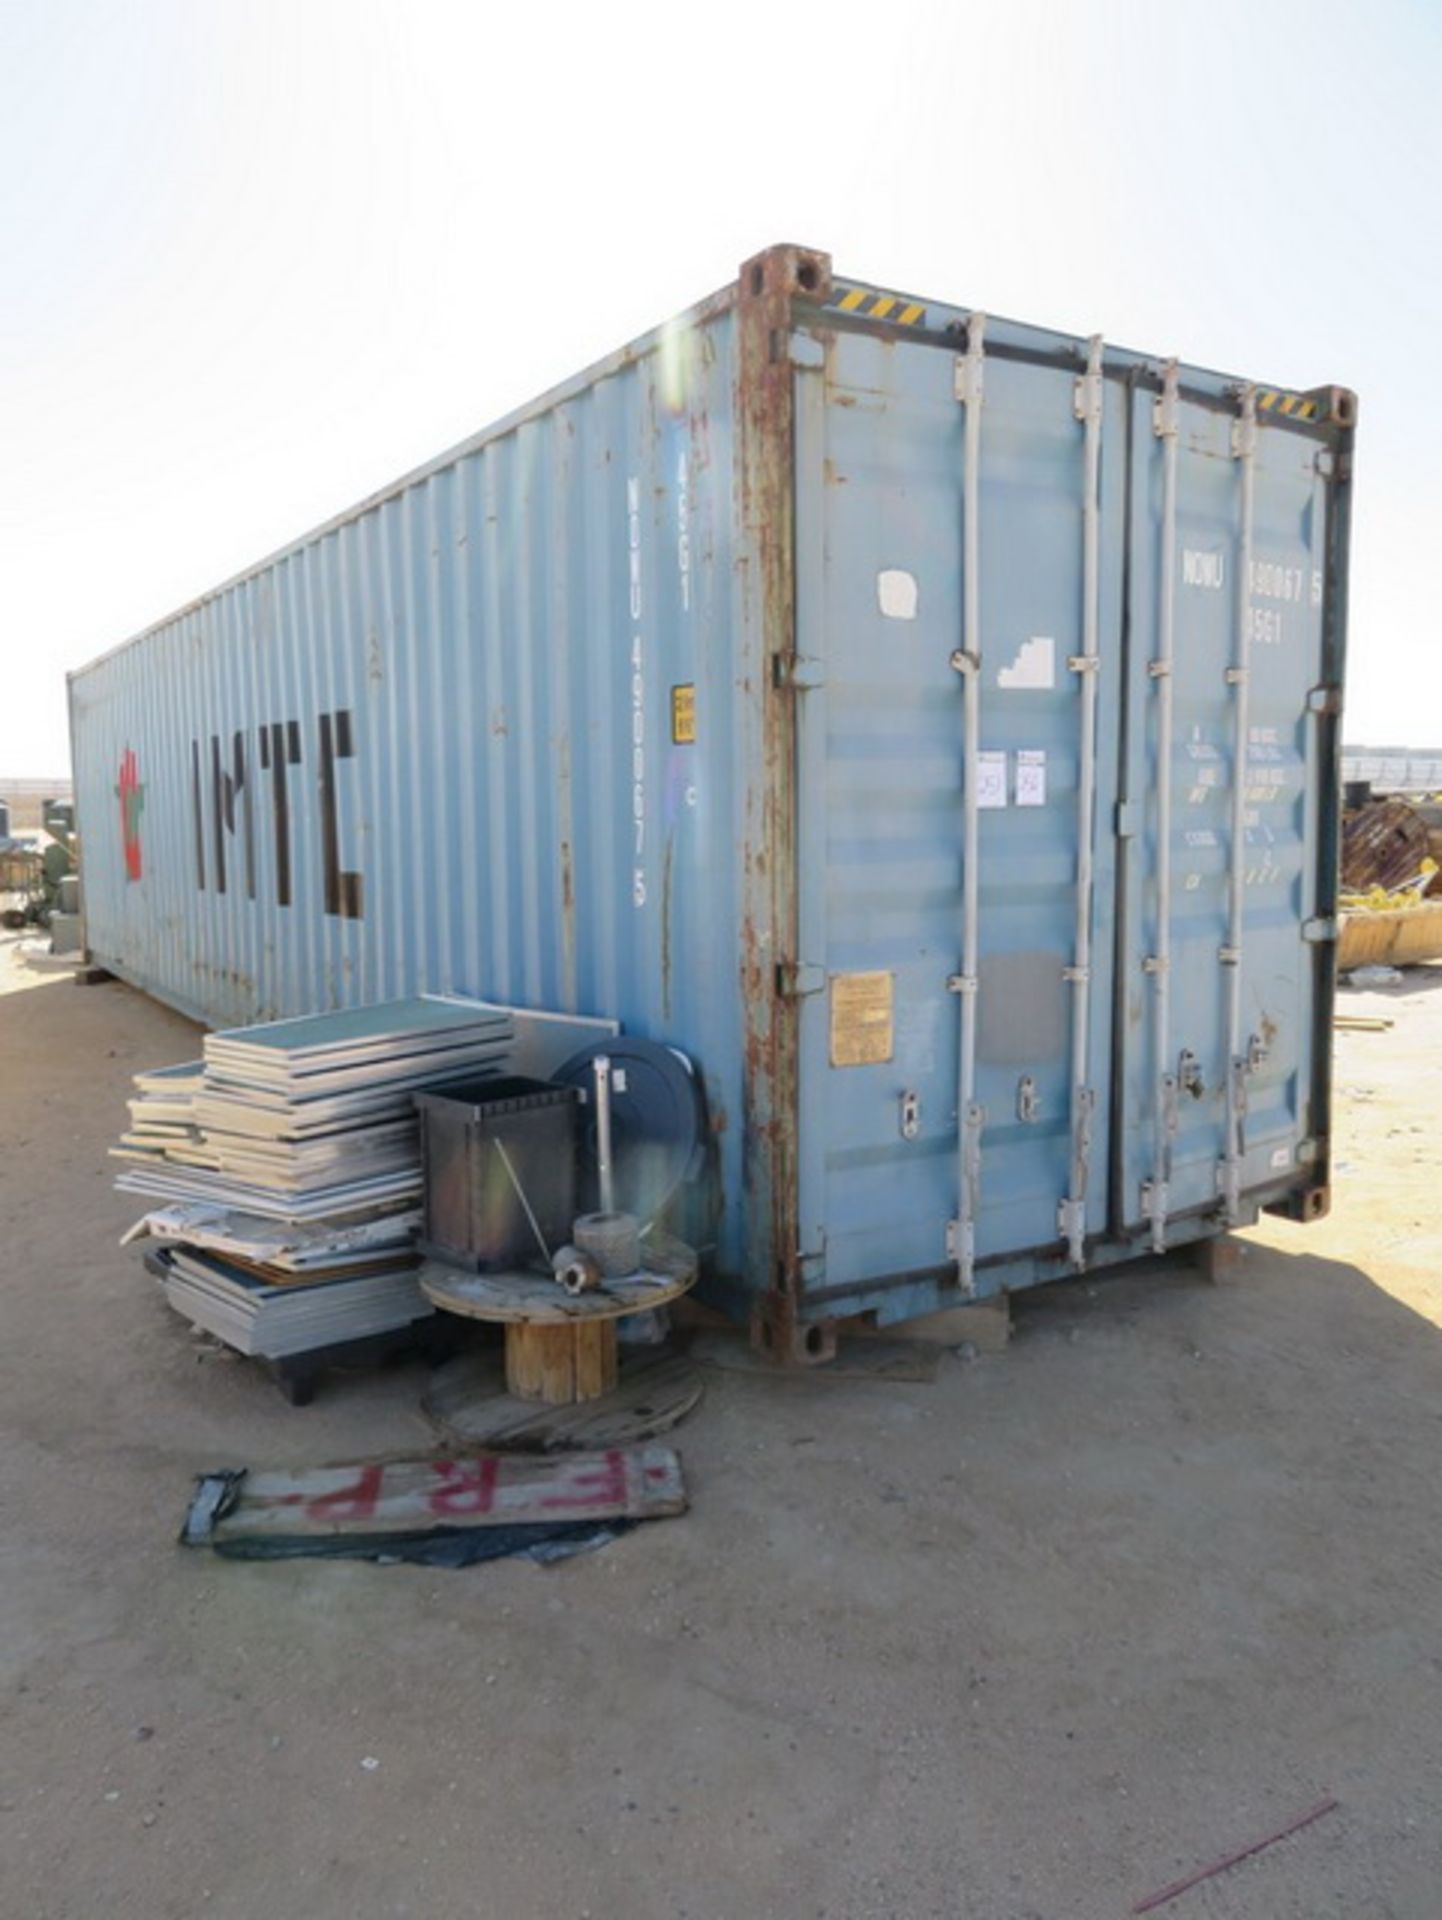 CIMC-NSSC 1AAA-10HC40-22G Shipping Container, 39' x 8' x 114"H, 8,600 LBS Tare Weight, 67,200 LB